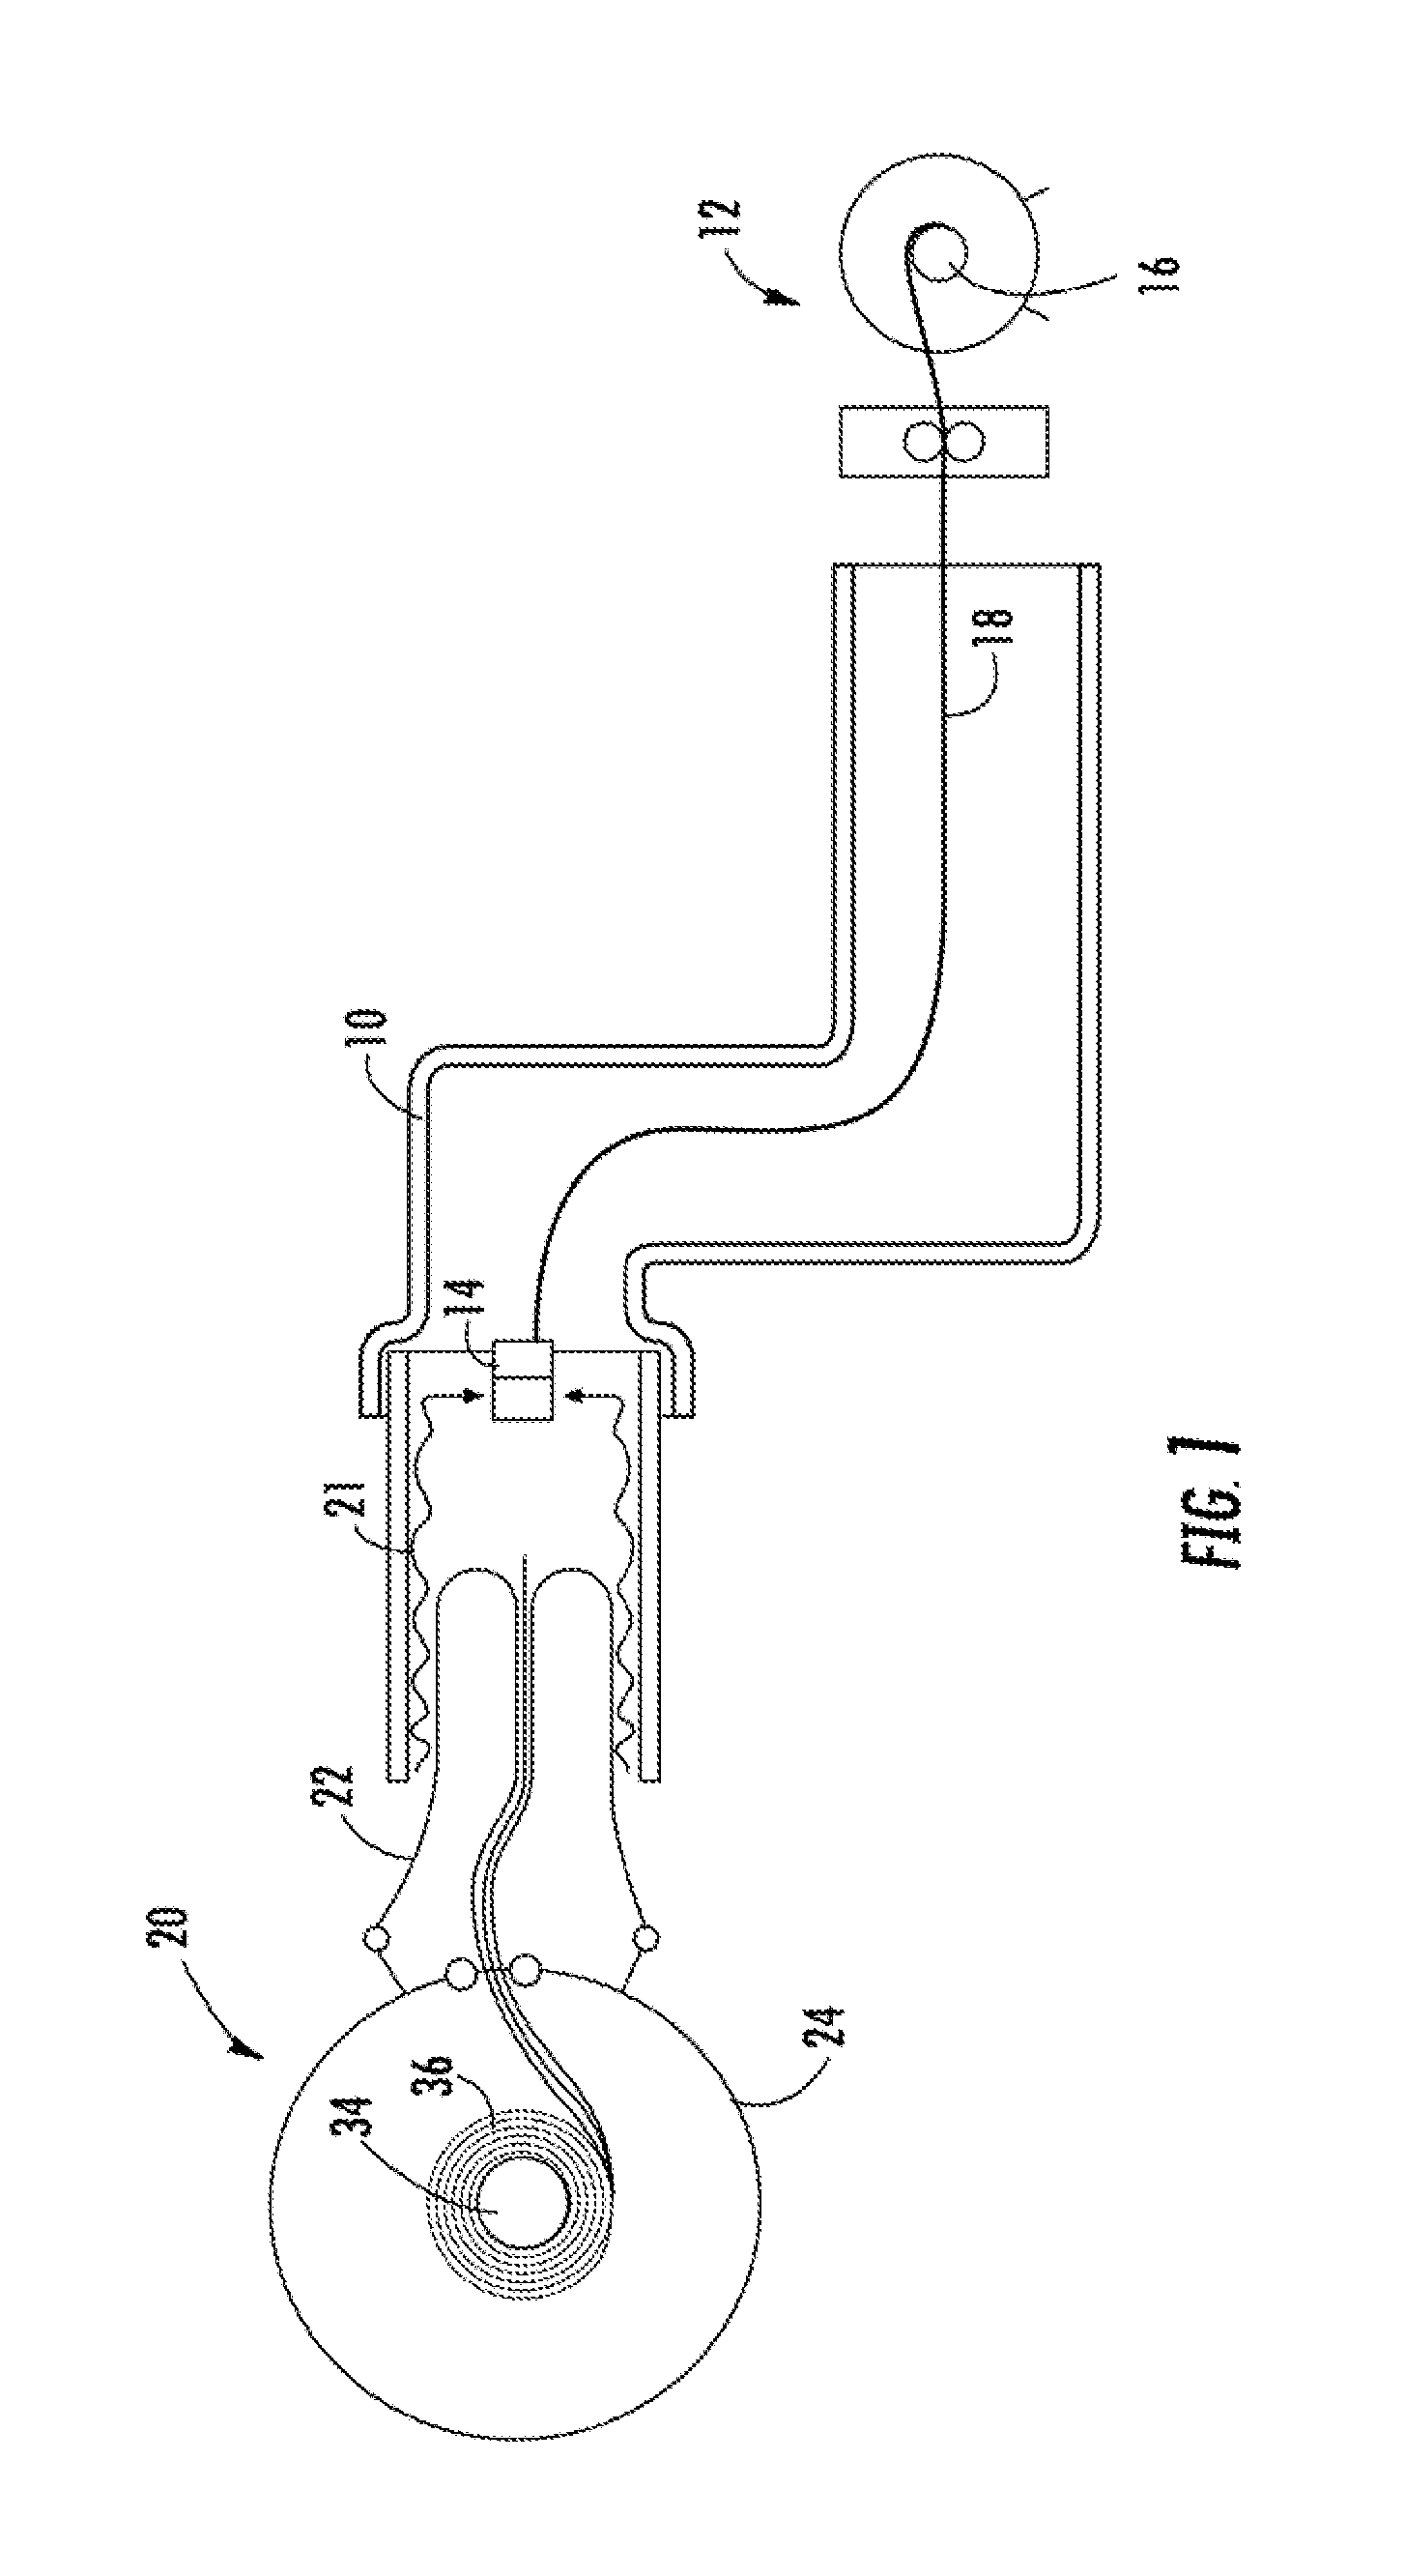 Pressure infusion lining system